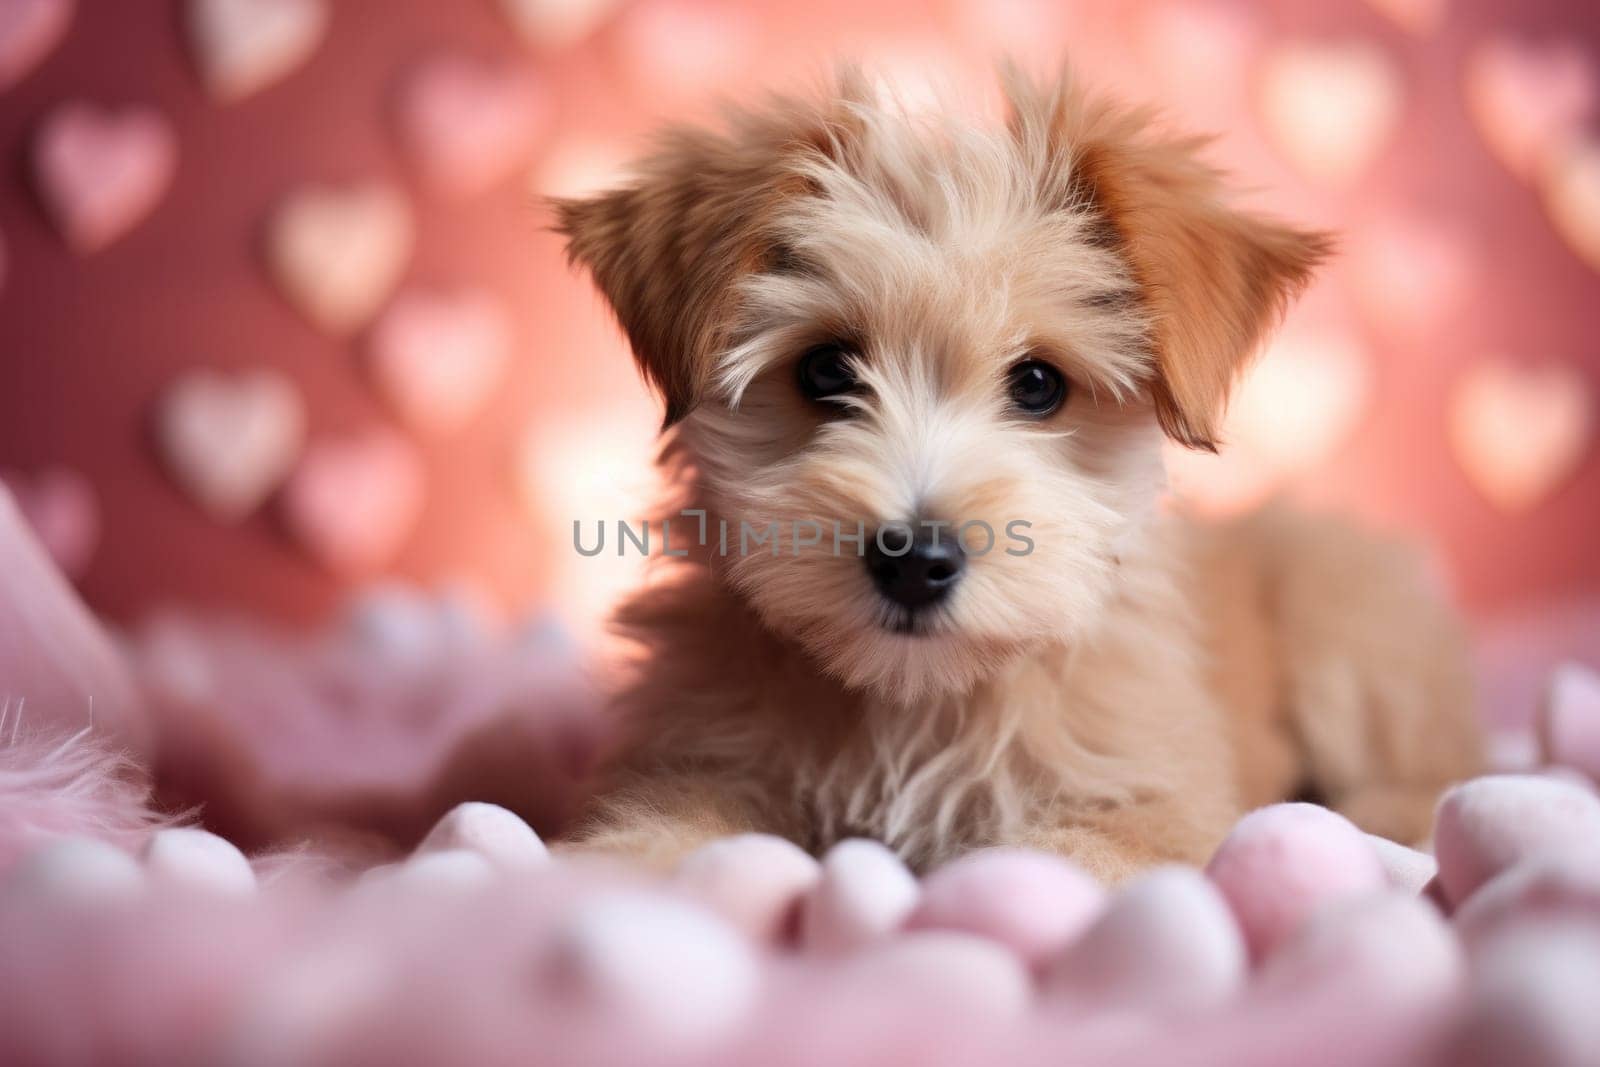 A small dog laying on a pink background with hearts